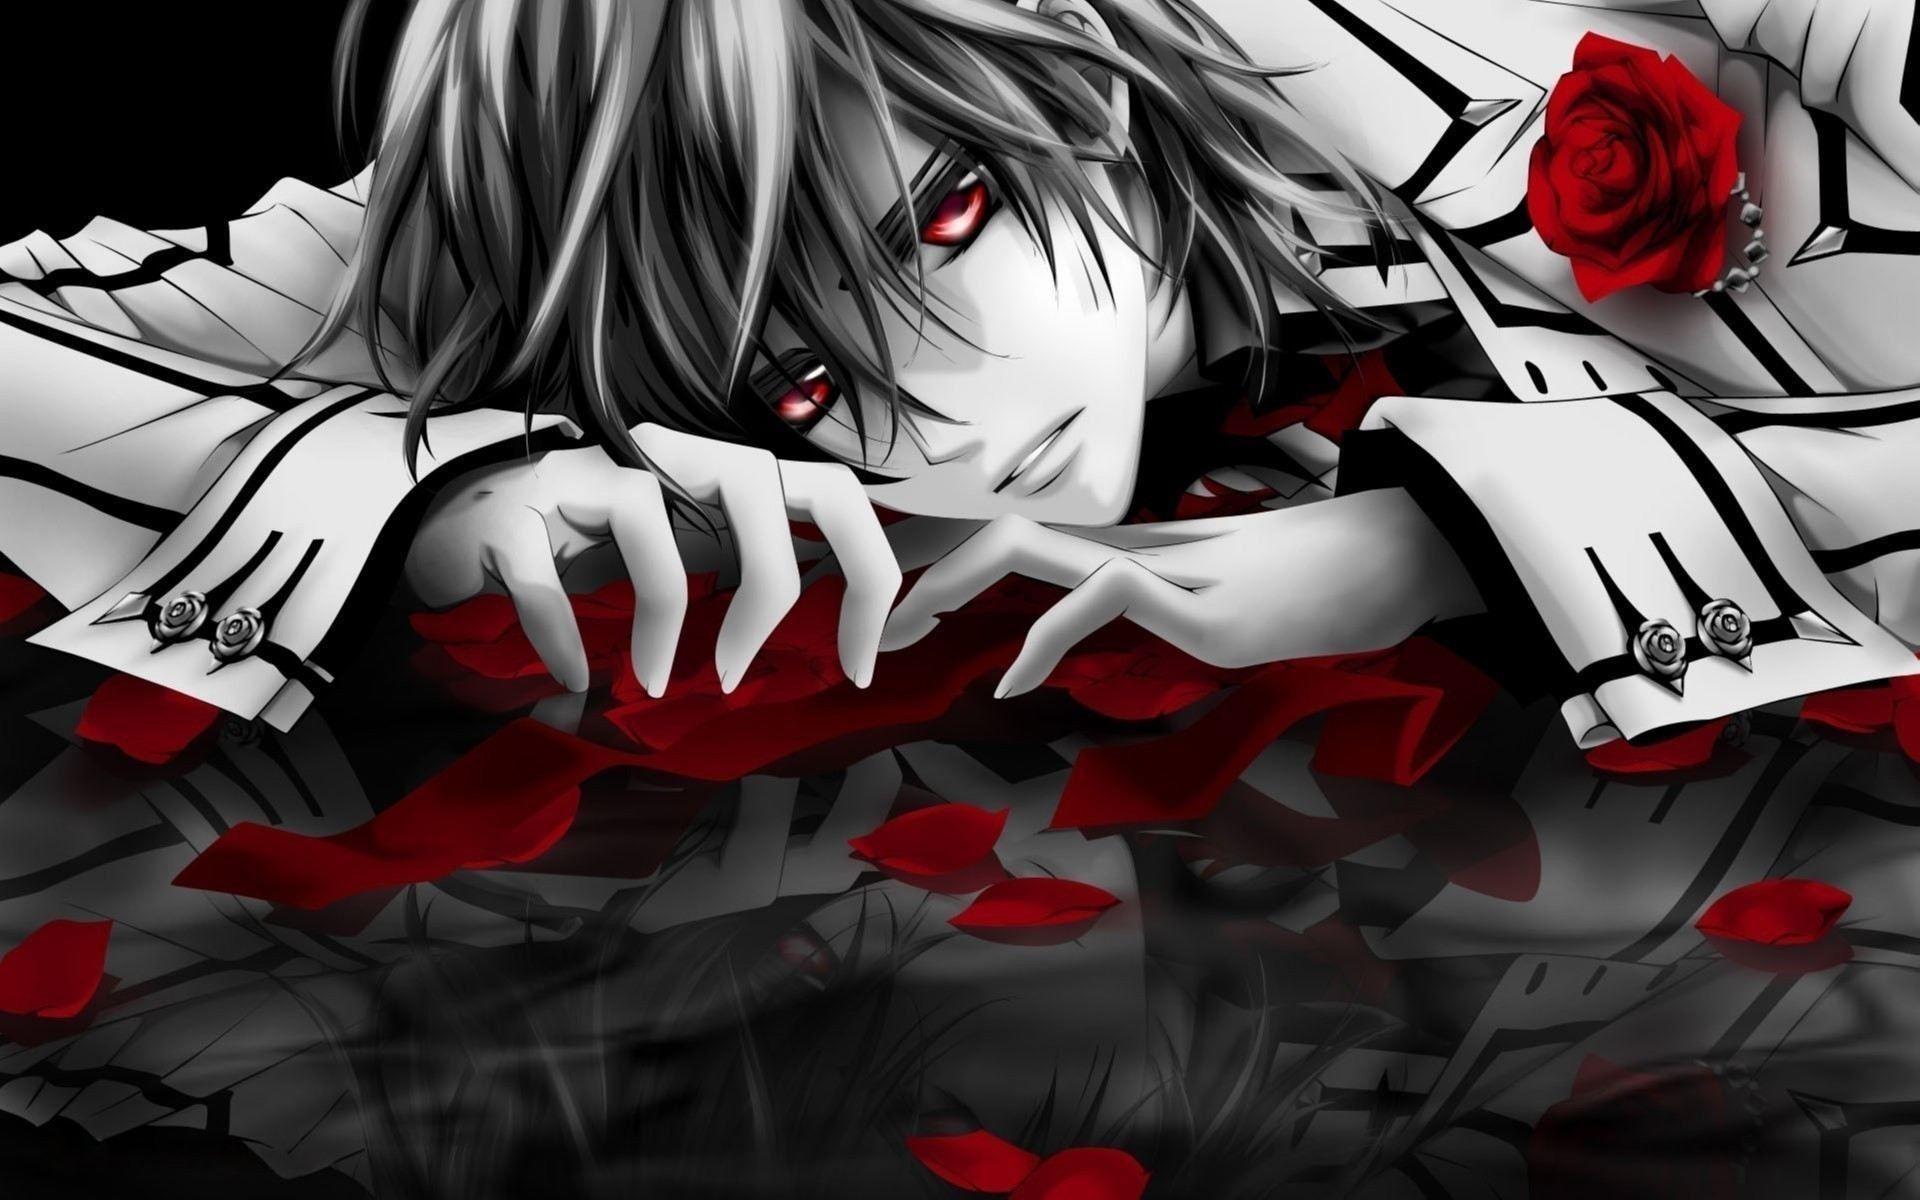 Bad Anime Boy Wallpapers Top 10 Best Bad Anime Boy iPhone Wallpapers  HQ 